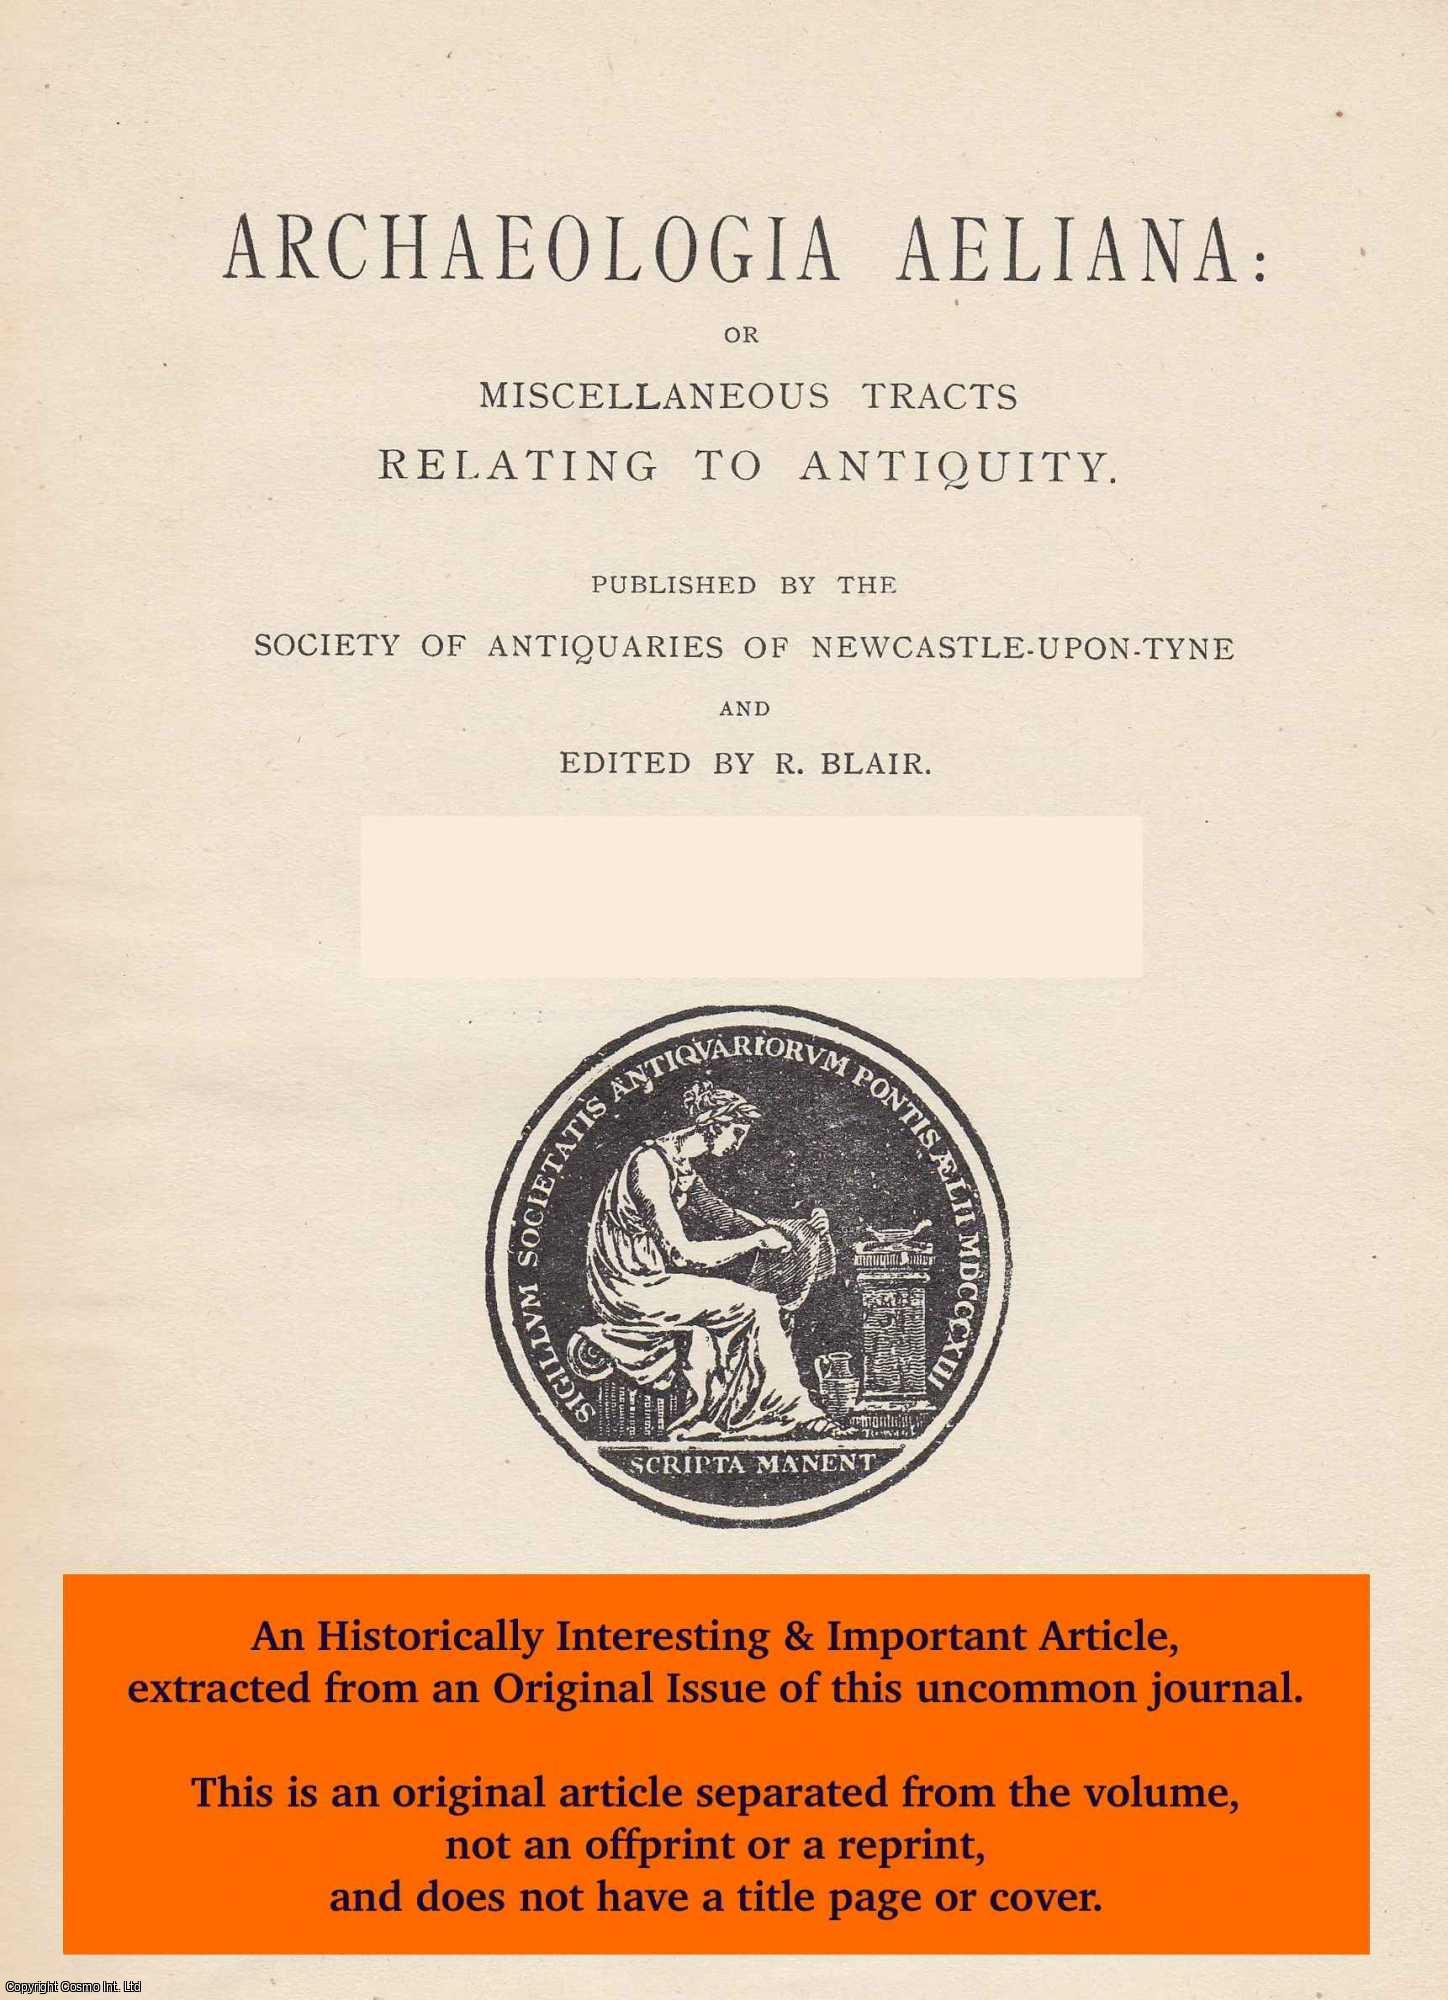 W. Bulmer - Museum Notes, 1964. An original article from The Archaeologia Aeliana, 1964.